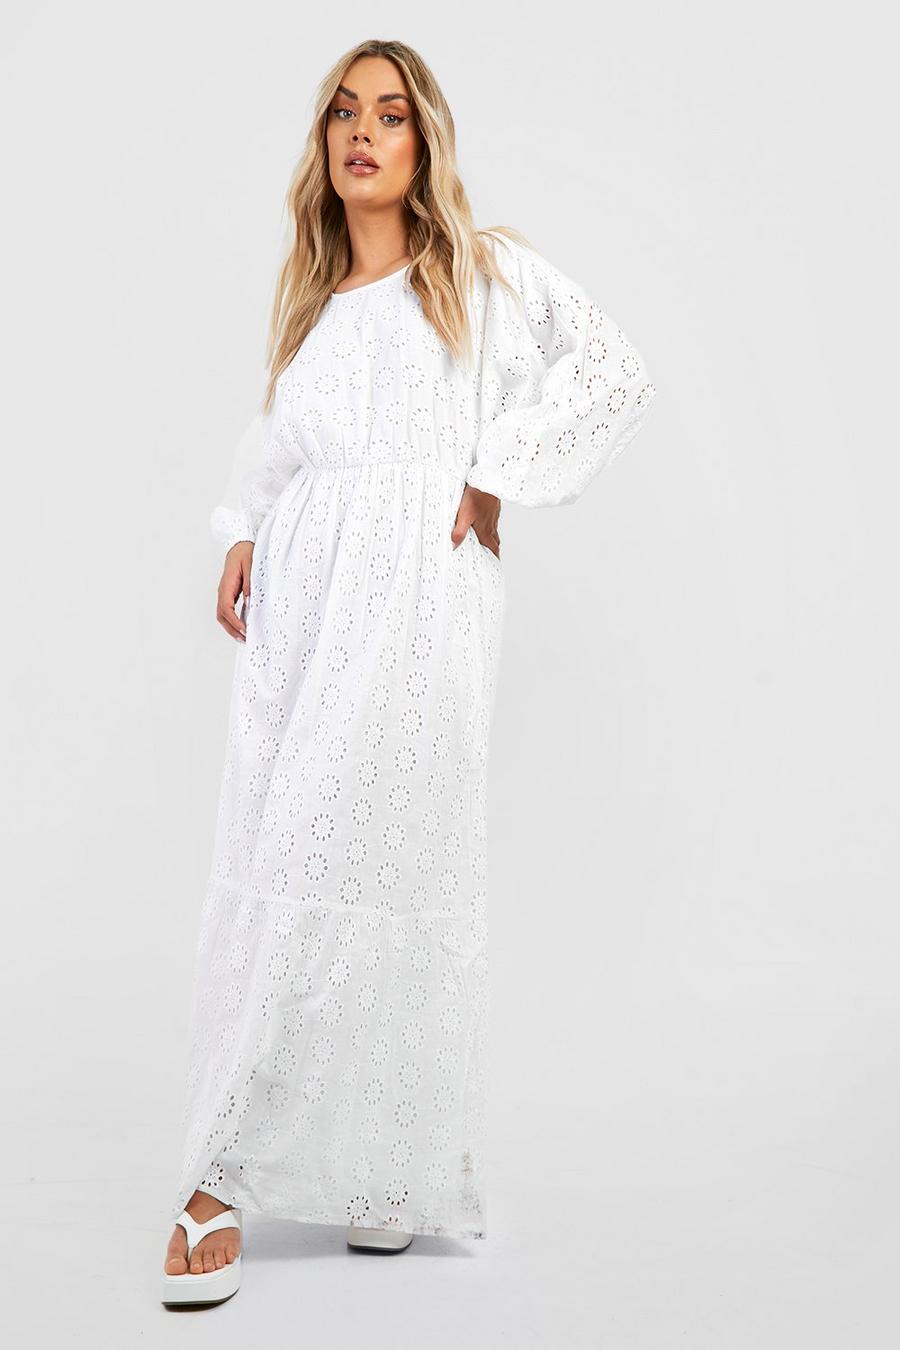 Grande taille - Robe longue froncée en broderie anglaise, White